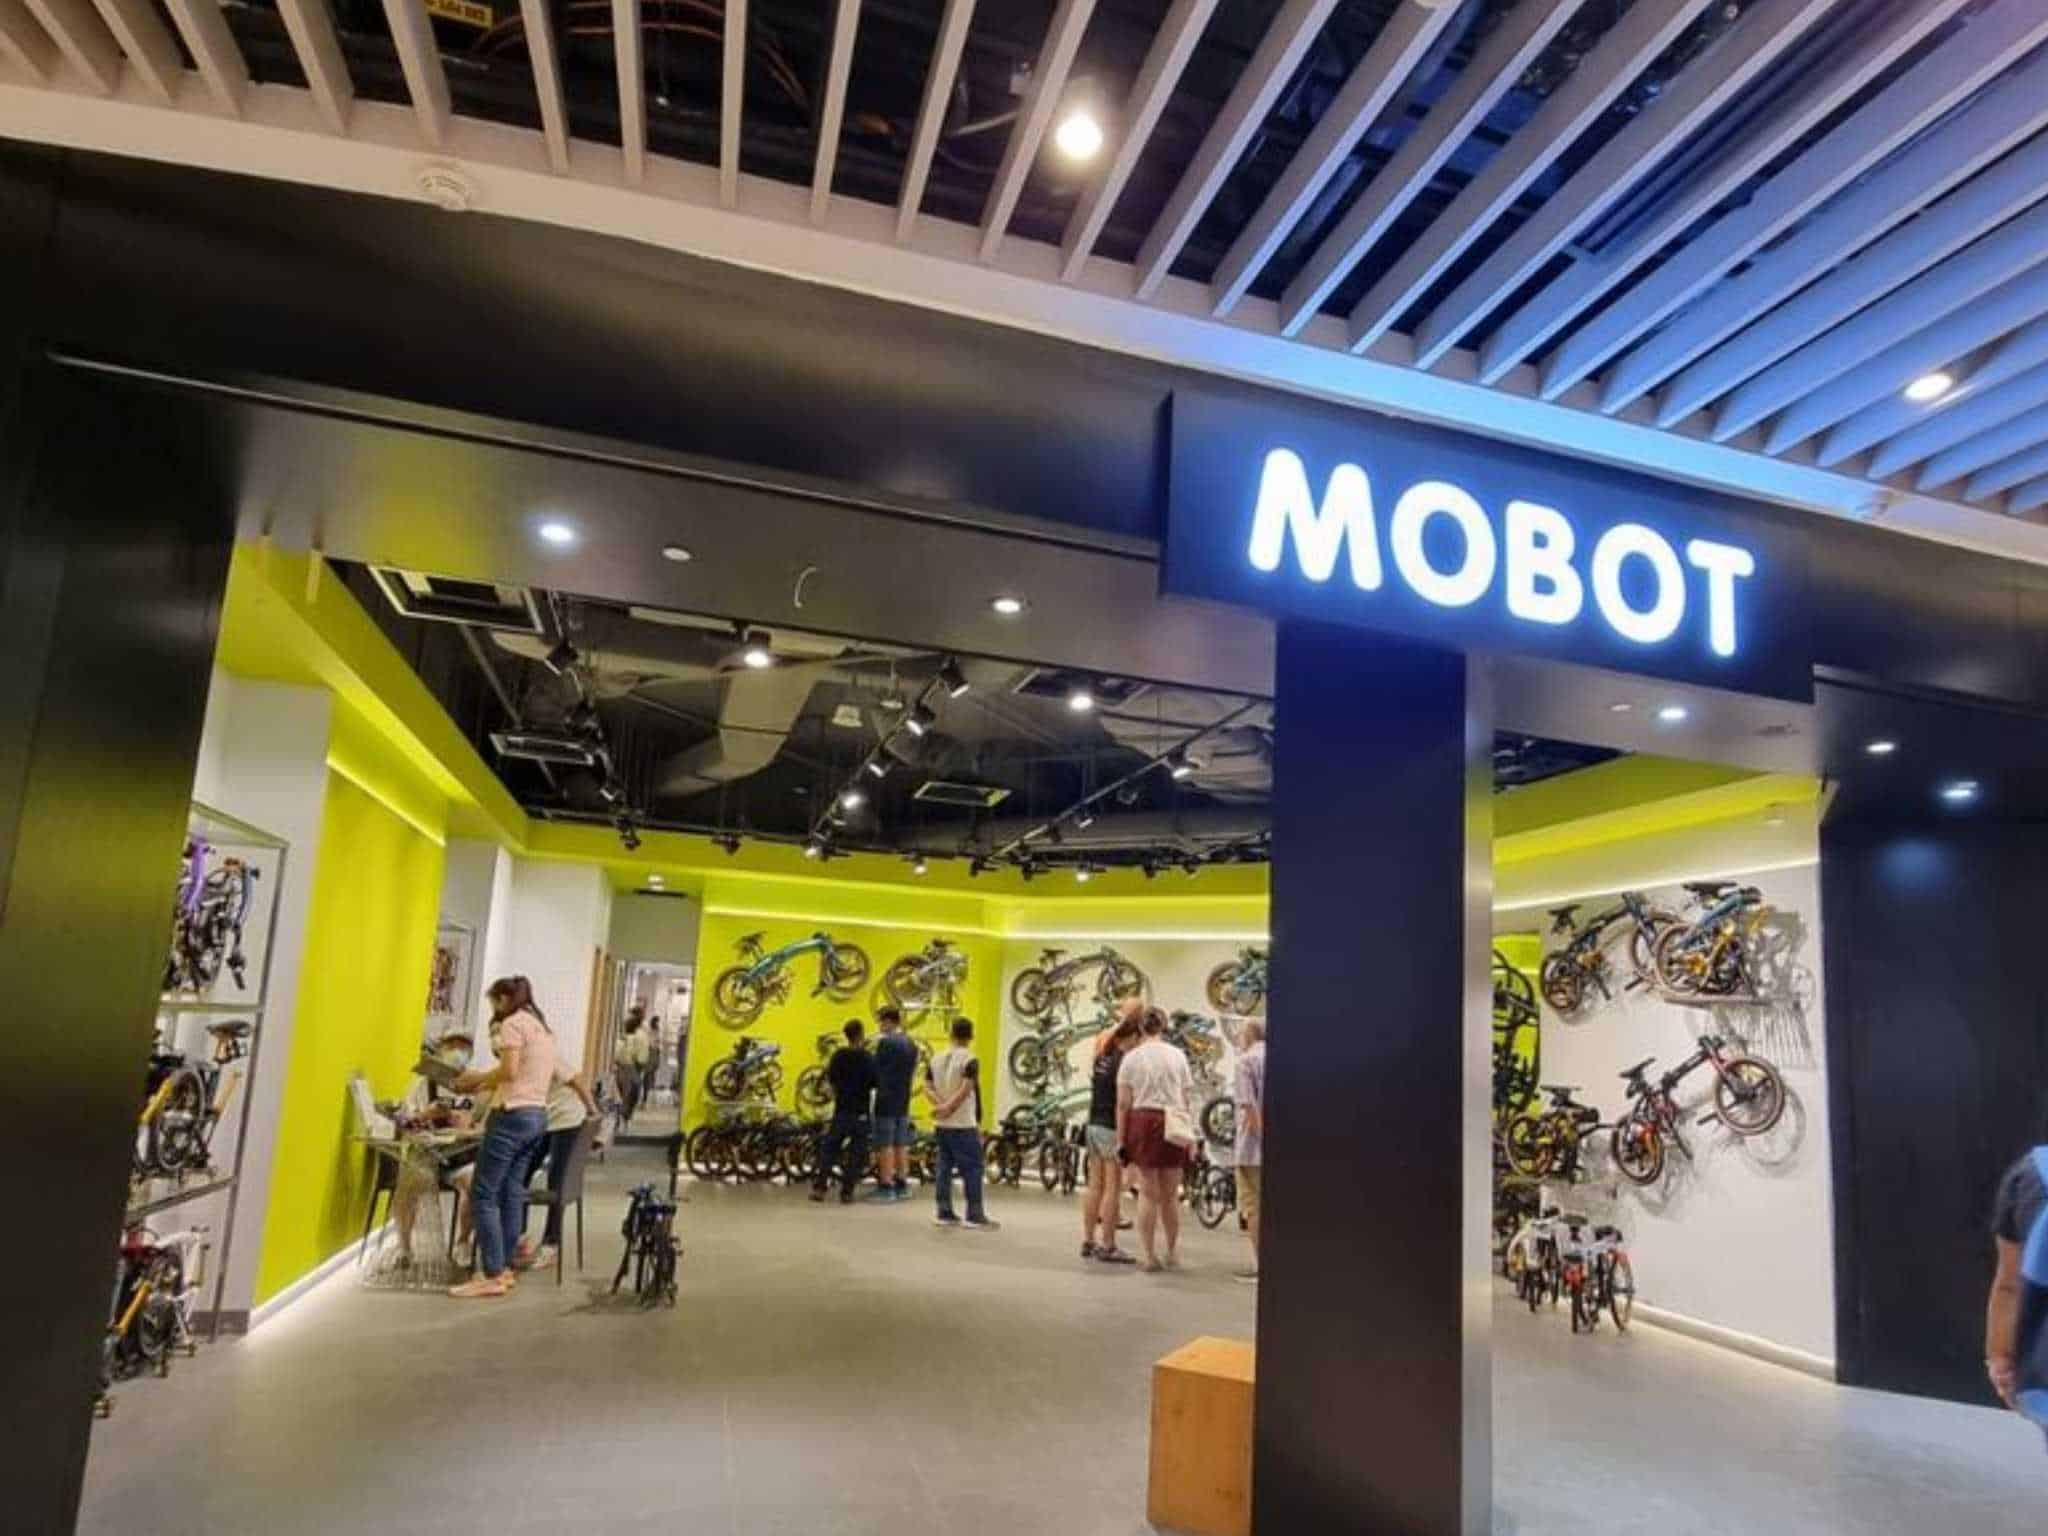 ROYALE by MOBOT at Bedok Mall exterior - Press release: MOBOT x ROYALE Opens Bicycle Shop In Bedok Mall